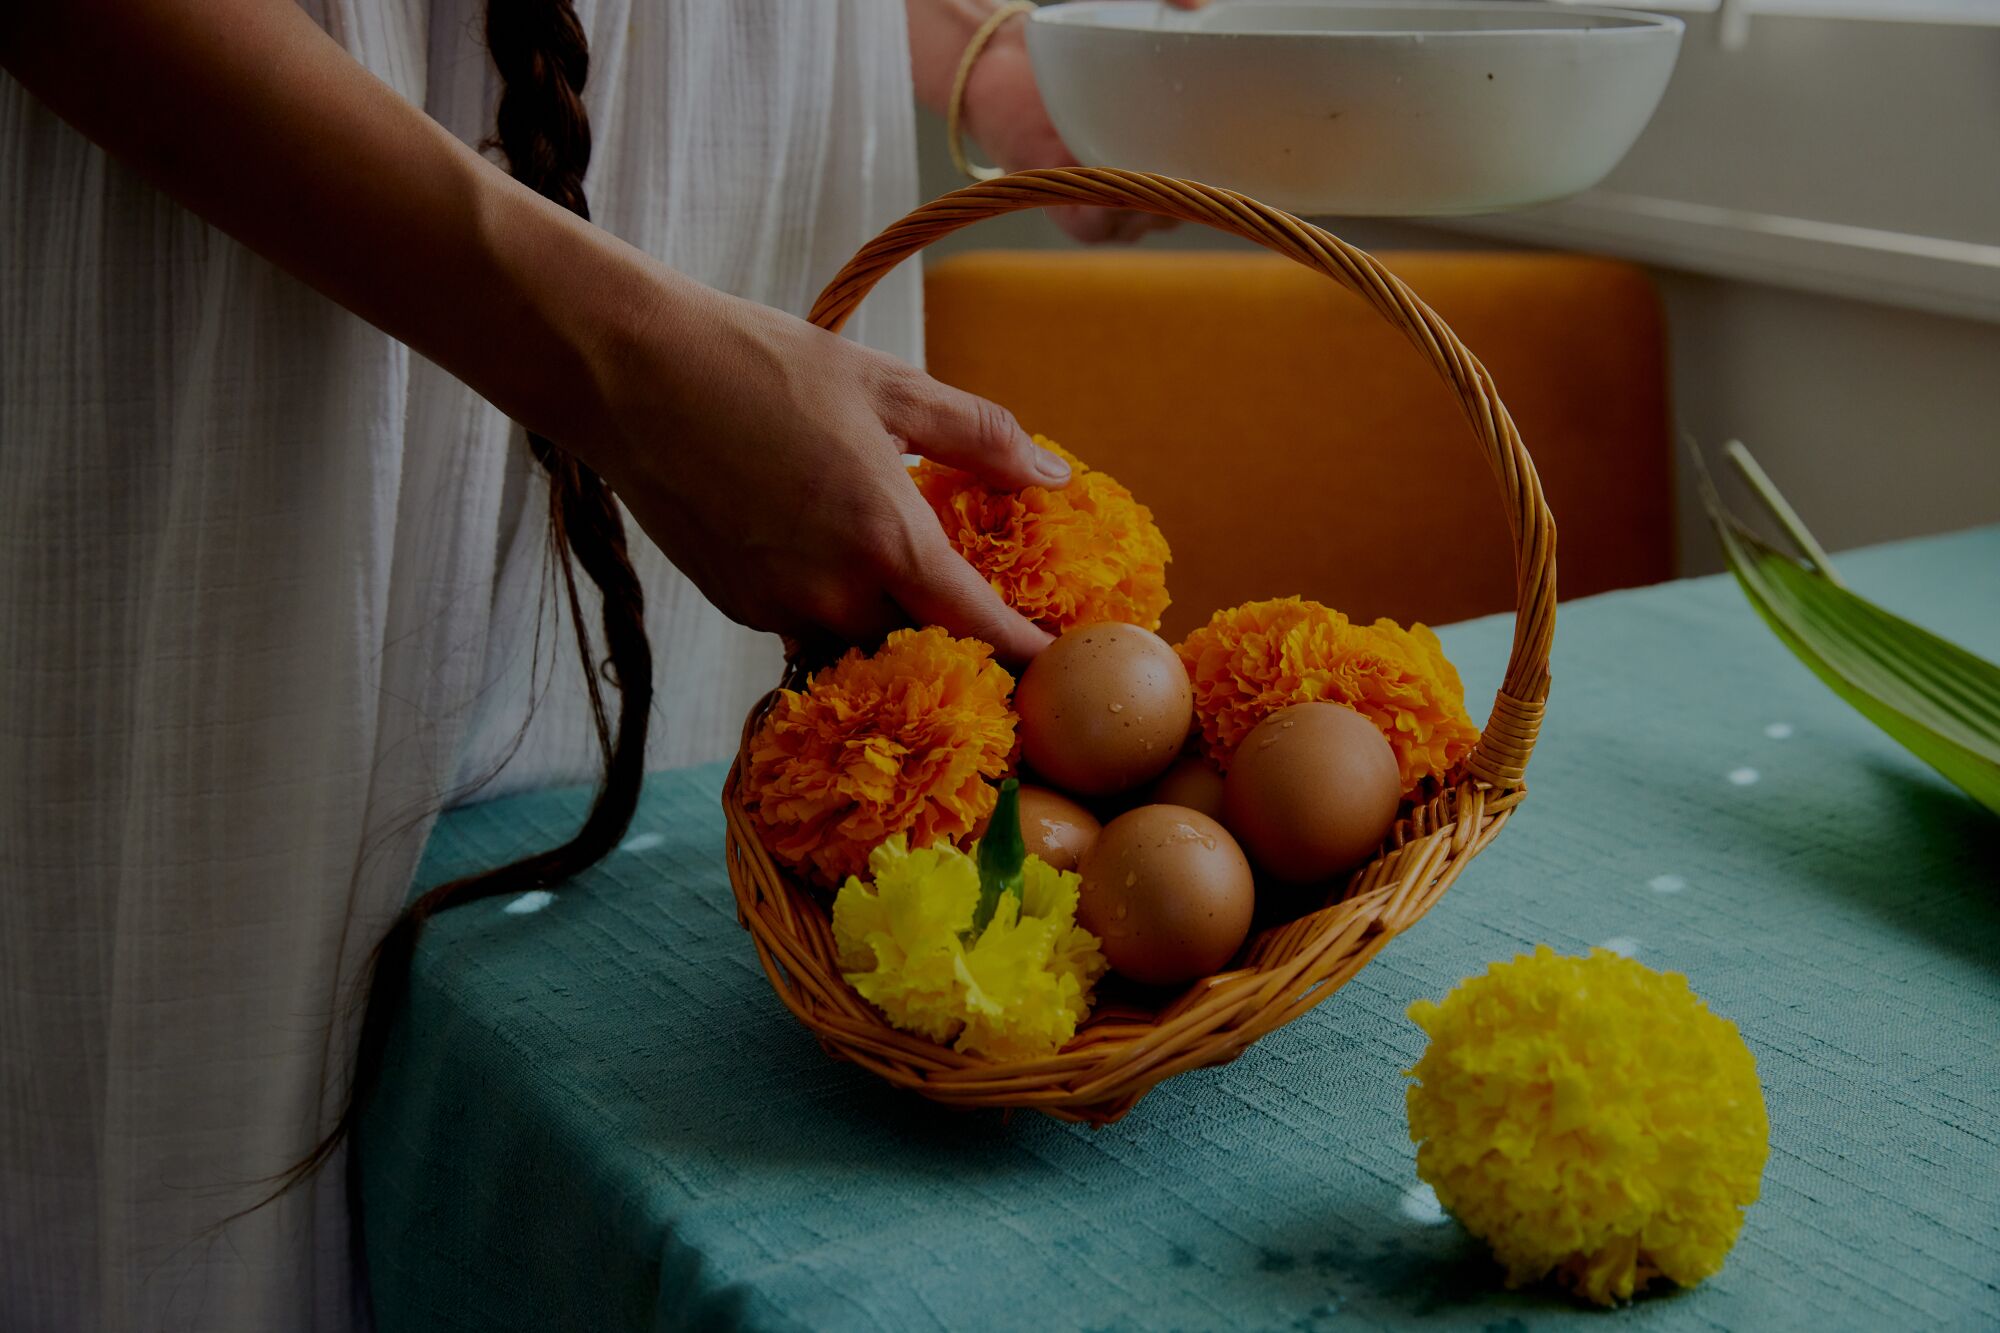 Color is a major component of Saehee Cho's tablescapes. A basket of fresh eggs, with vibrant marigolds.